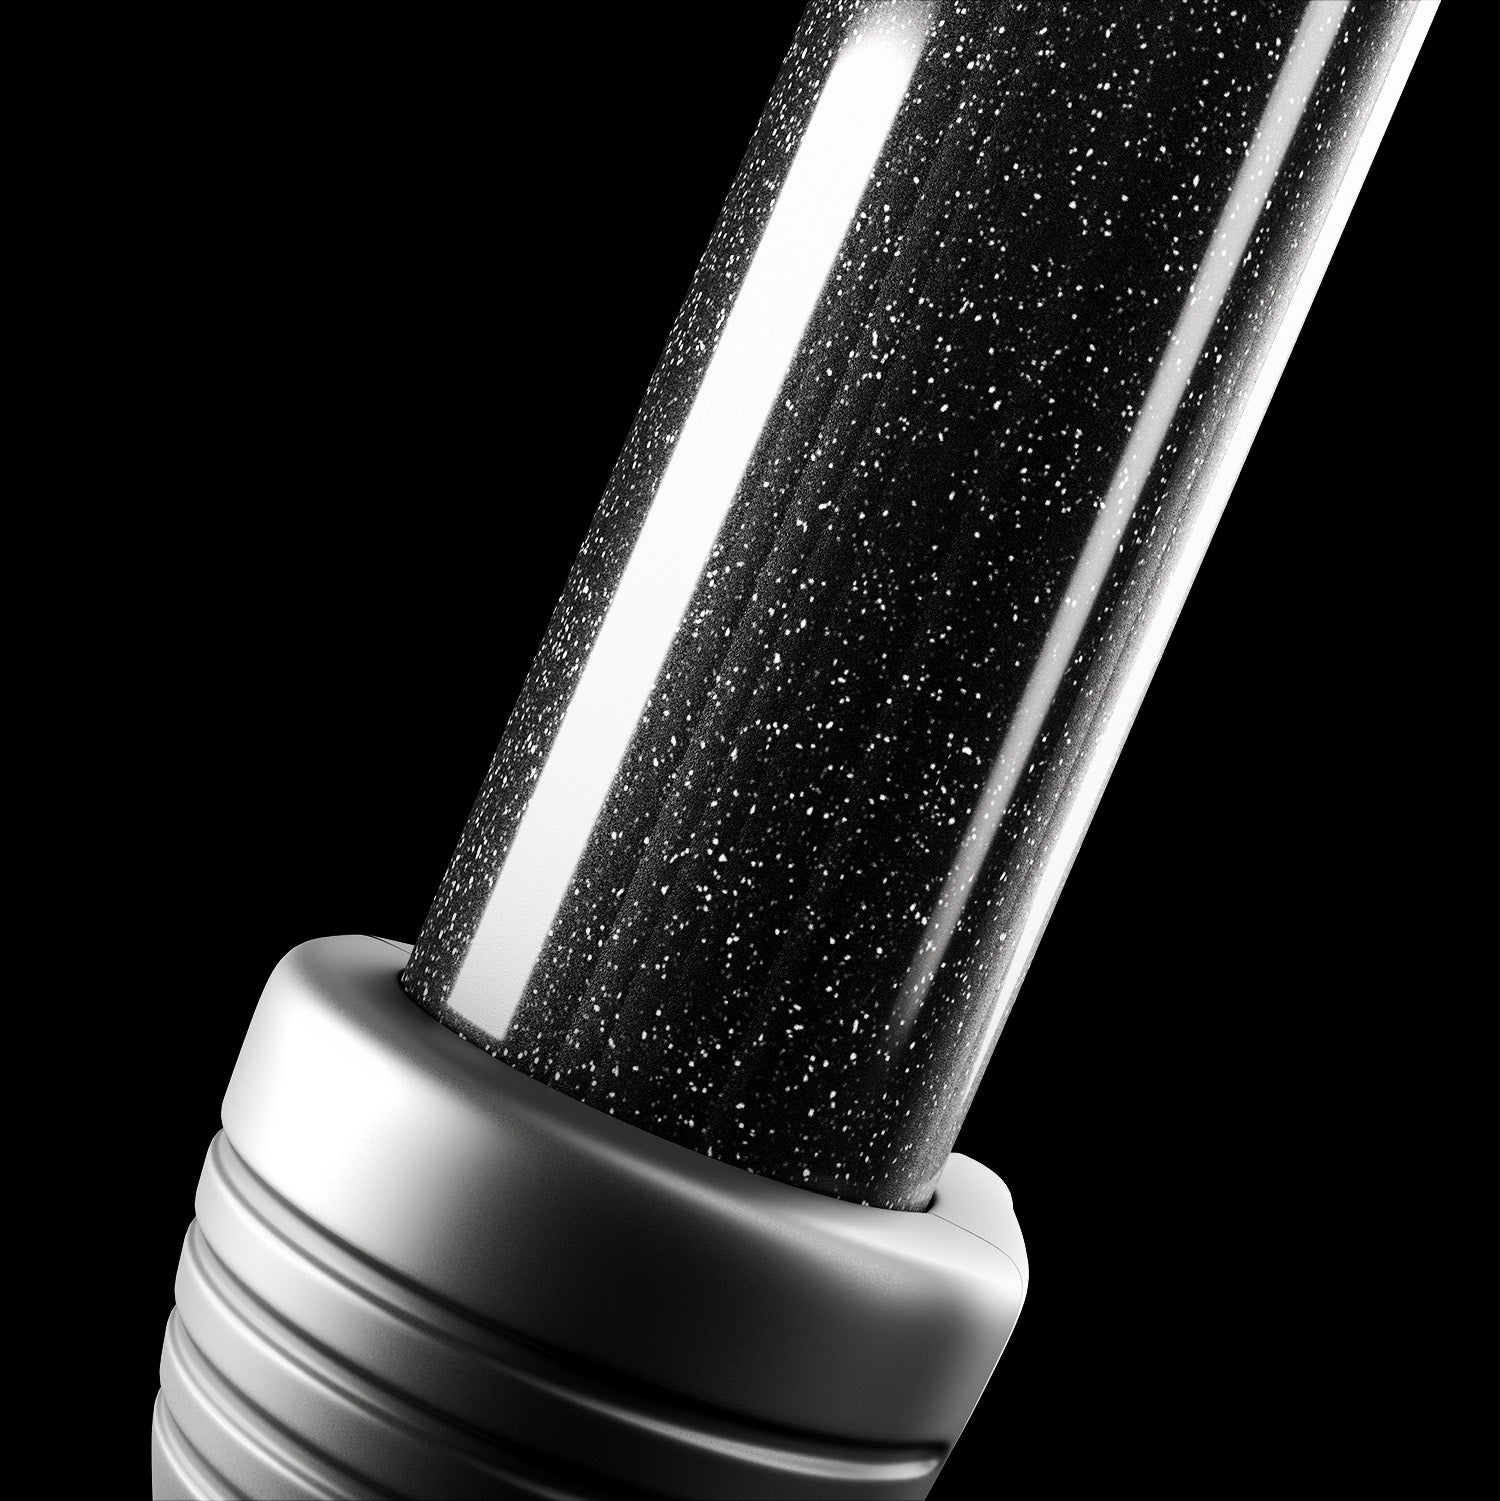 Close-up image of the mineral infused ceramic barrel of black CLOUD NINE Curling Wand on a black background.